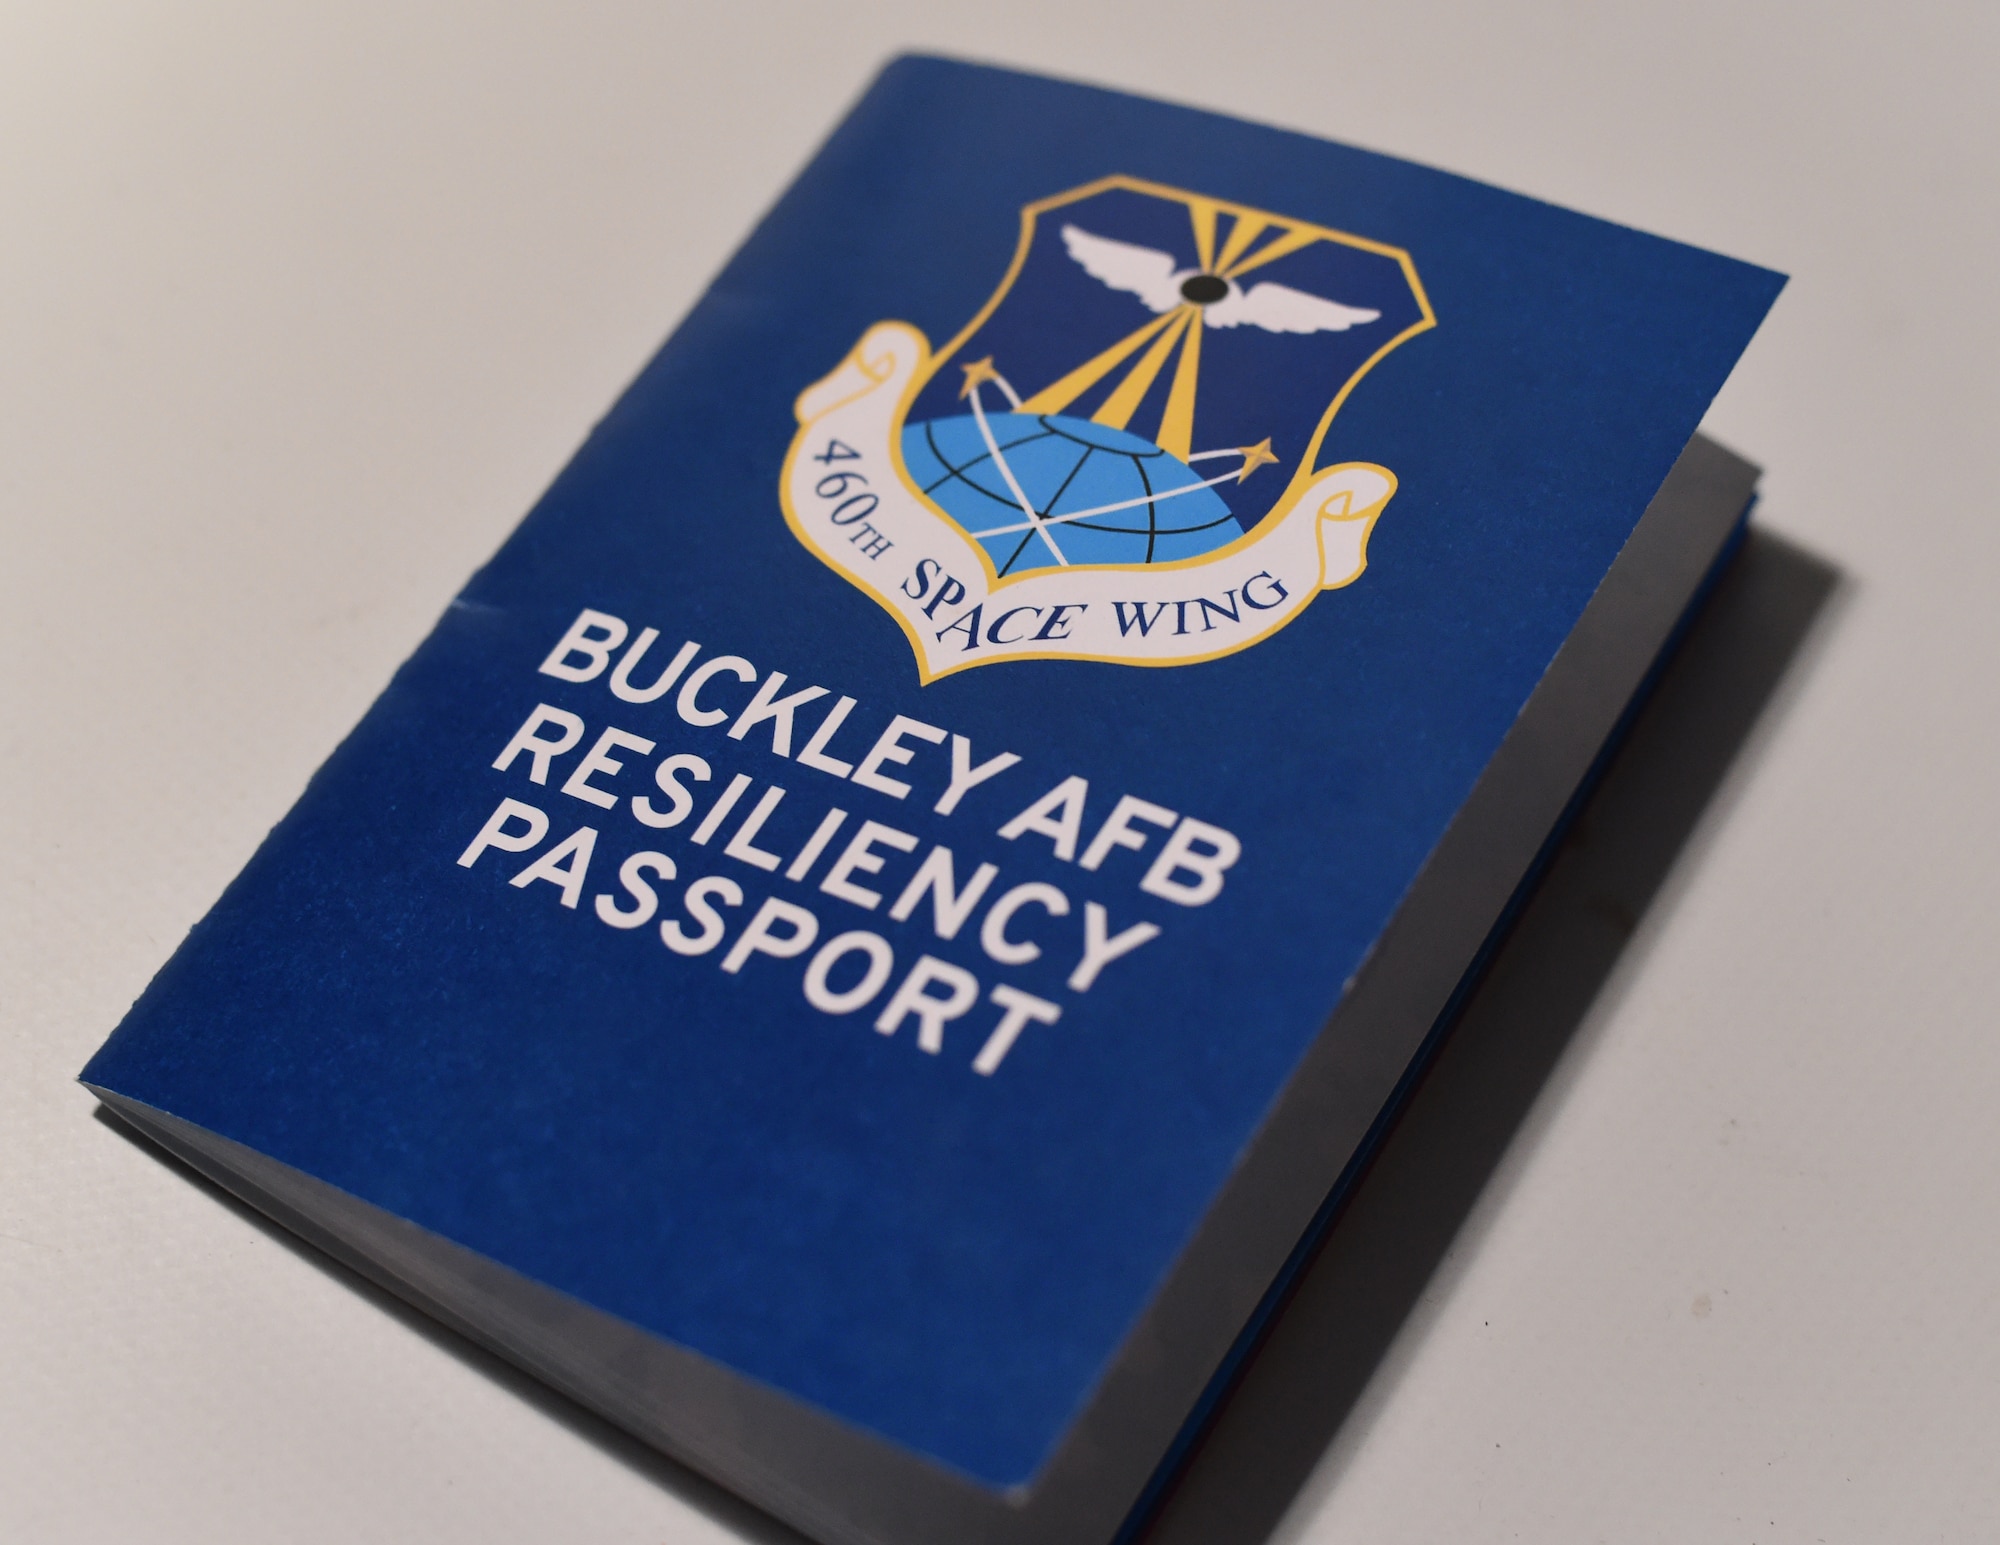 Buckley Air Force Base is distributing ‘Resiliency Passports’ to members of Team Buckley to encourage involvement and participation in base services and programs beginning Nov. 7, 2014, on Buckley AFB, Colo. With a goal to increase Air Force resiliency and life skills, the Resiliency Passport encourages Airmen to attend classes they might not have previously attended. (U.S. Air Force photo by Airman 1st Class Samantha Saulsbury/Released)